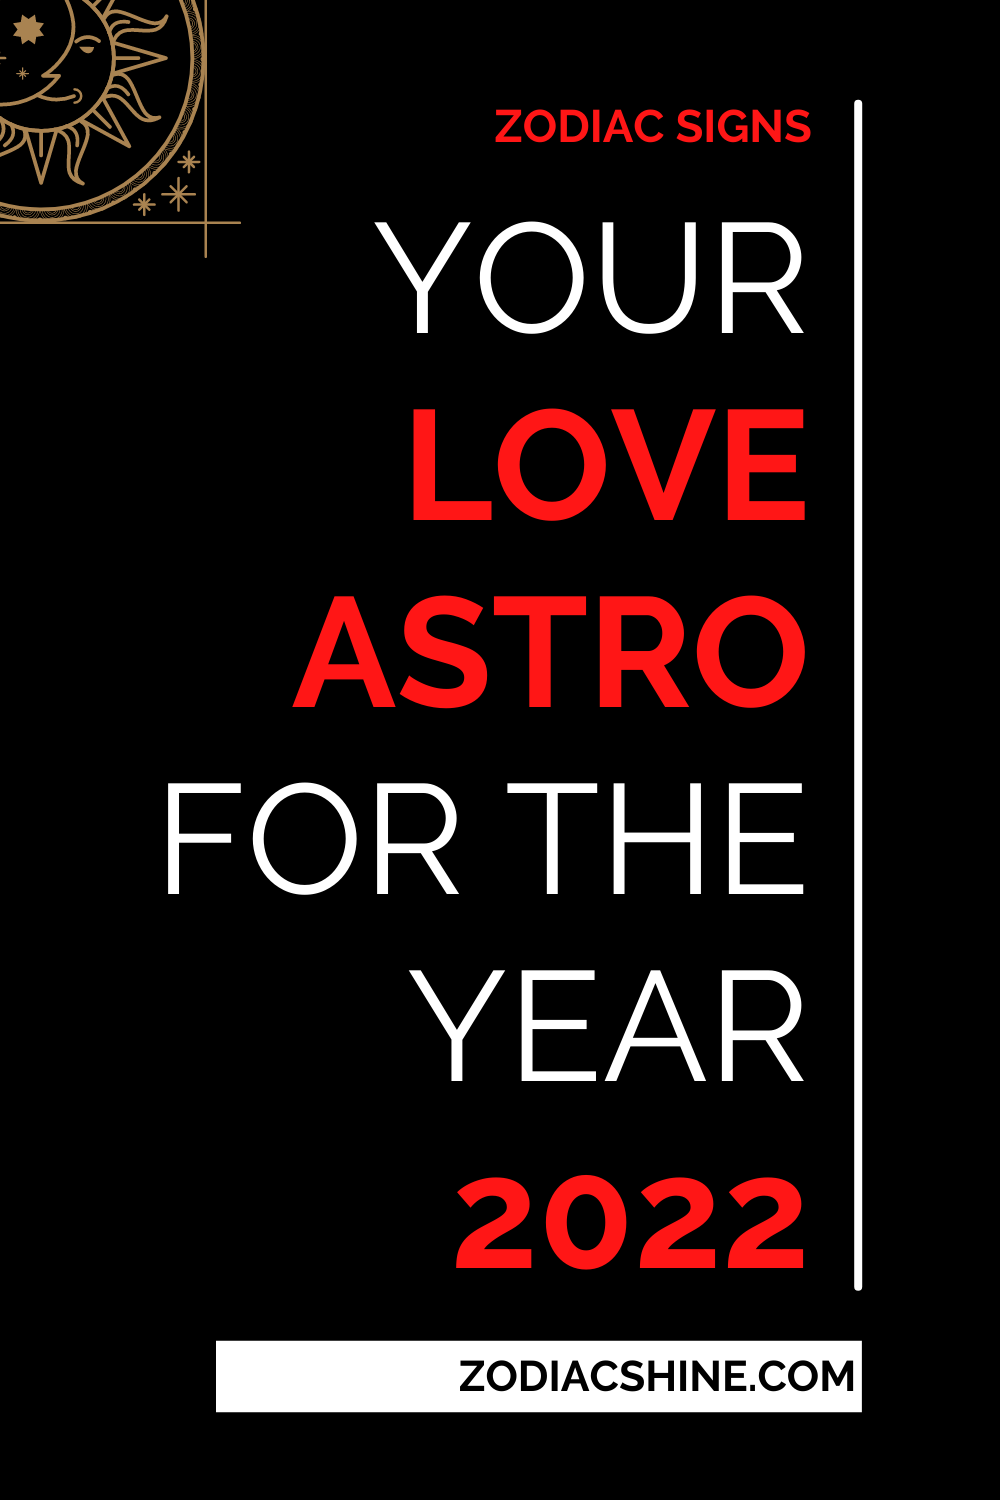 Your Love Astro For The Year 2022